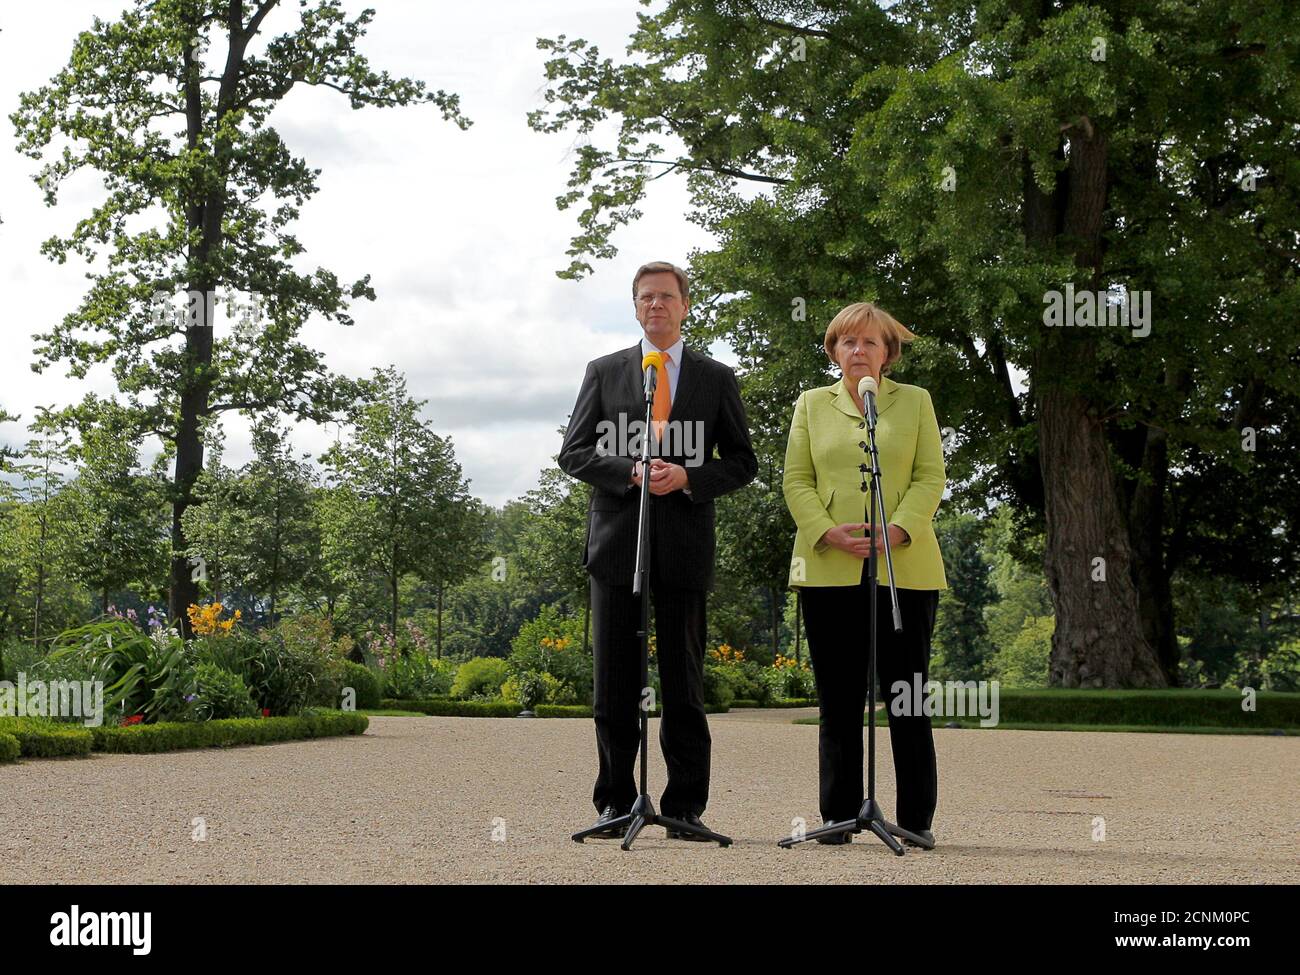 German Chancellor Angela Merkel (R) and Foreign Minister and Vice-Chancellor Guido Westerwelle speak to the media before a meeting with leading representatives of the economy and trade unions at the government guest house Schloss Meseberg, some 70 kilometres (43.5 miles) north of Berlin, June 18, 2010. REUTERS/Thomas Peter  (GERMANY - Tags: POLITICS) Stock Photo